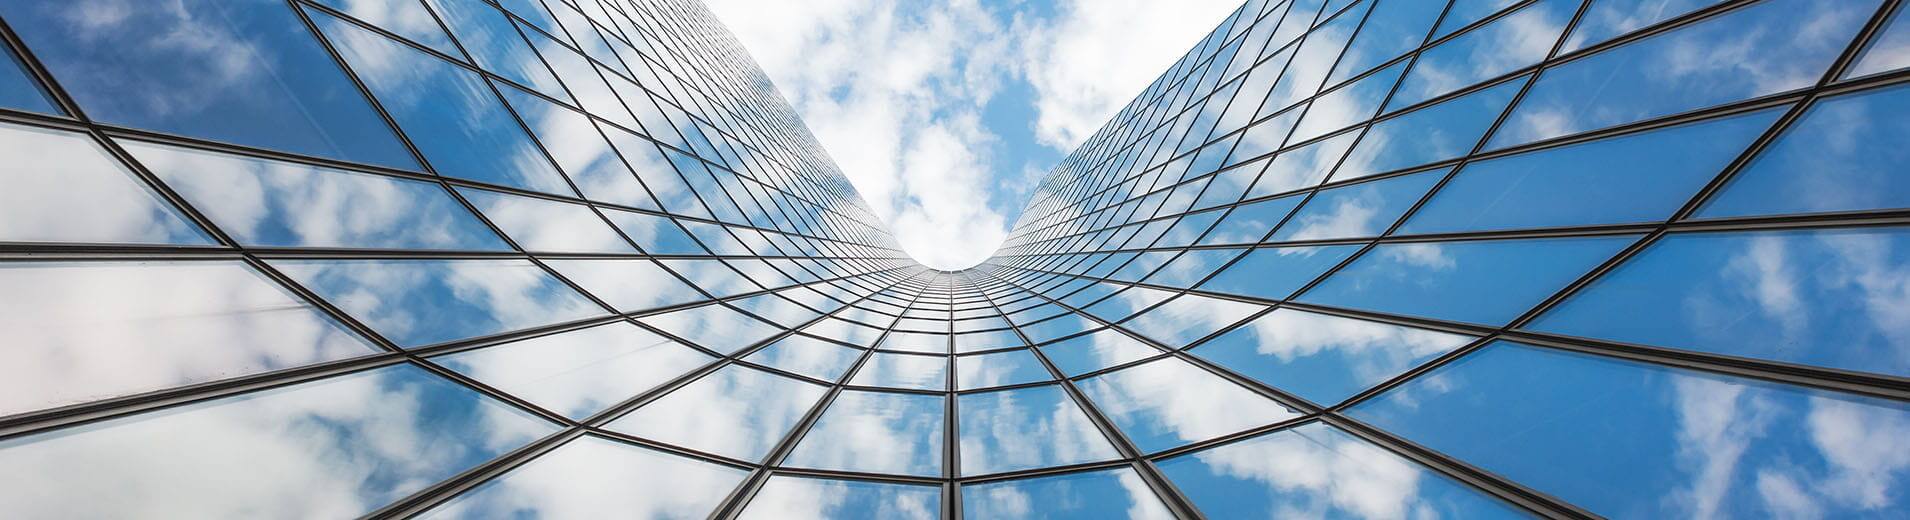 Sky_and_Clouds_Reflecting_in_Building_P_1072_1910x520